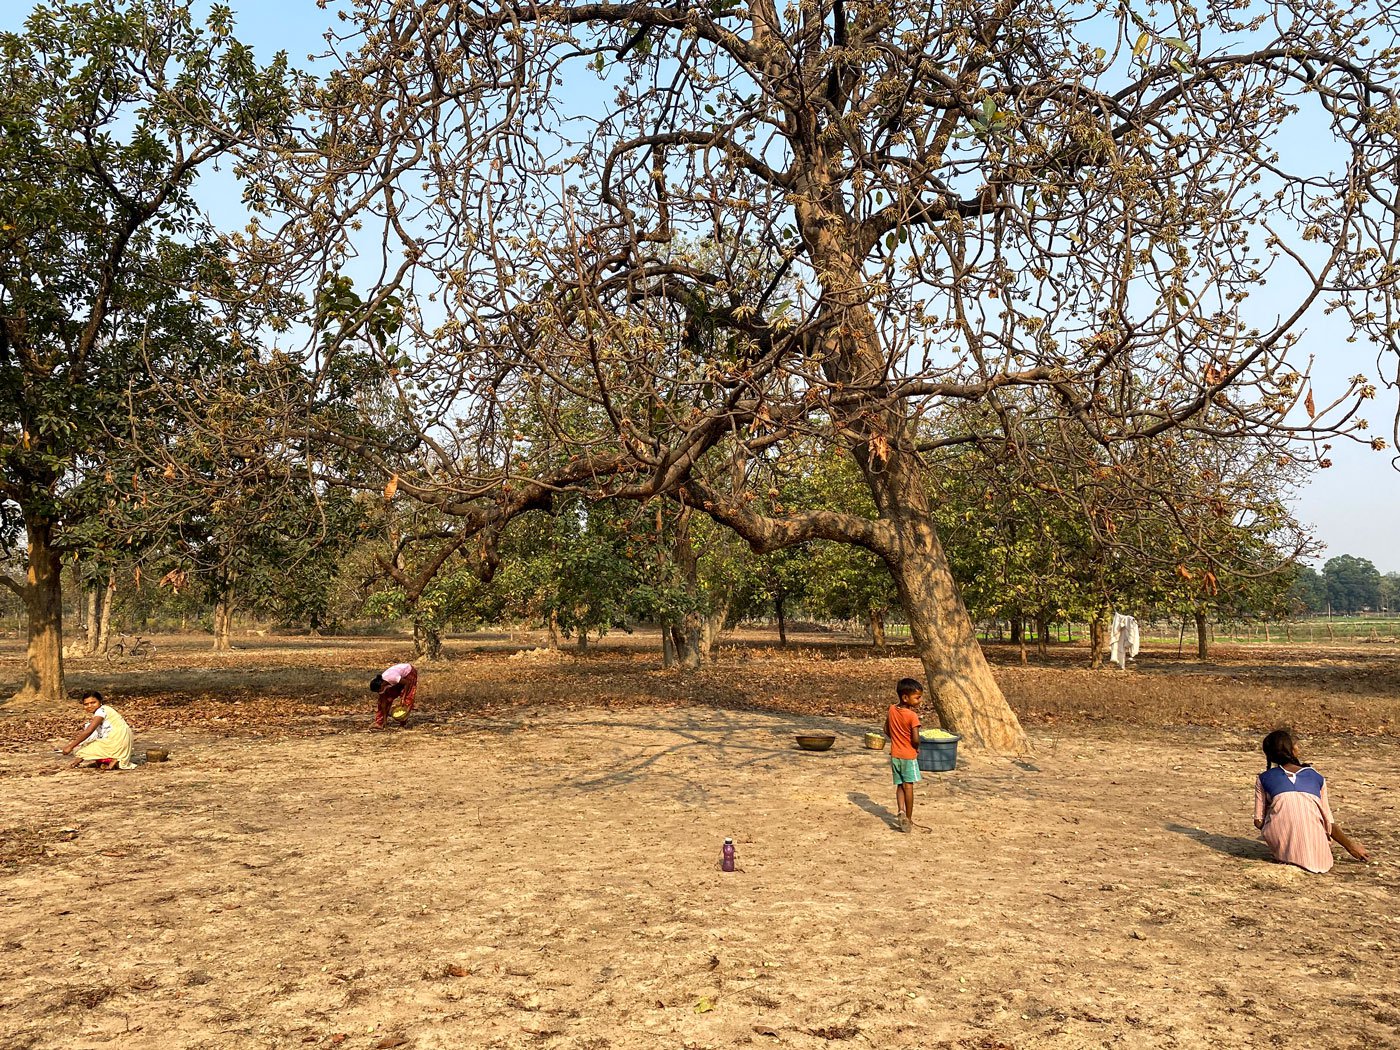 Usha (extreme right) and her sisters Uma and Sarita (yellow) are busy collecting mahua in the forest near Aam gaon